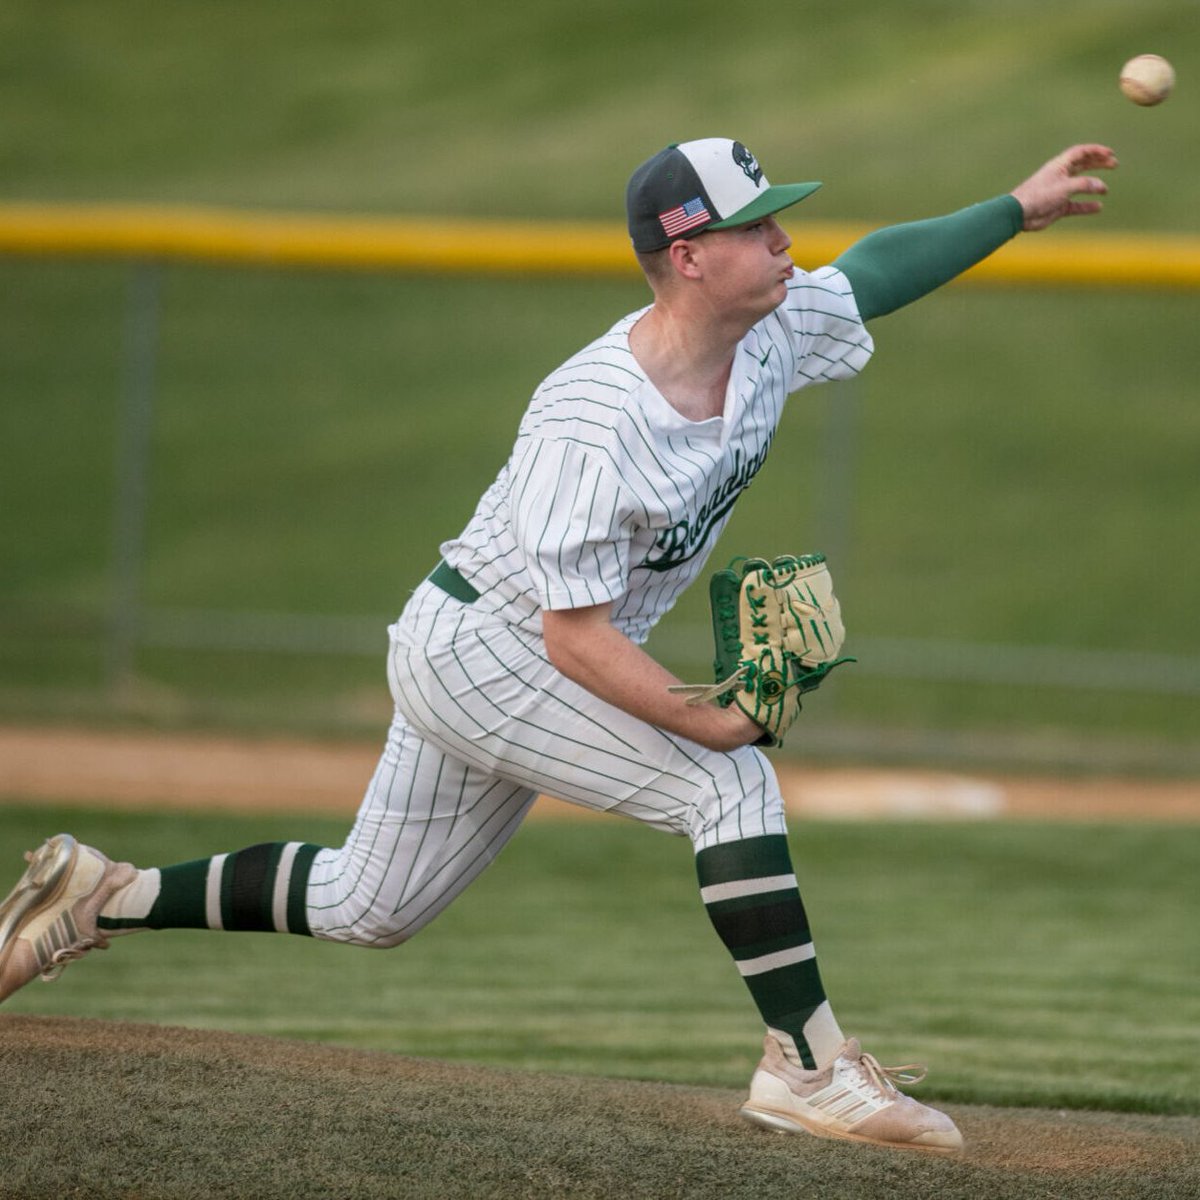 'They’re going to throw a punch. You’ve got to get up off the mat and just fight all the way through until the last round.' Broadway stayed sharp en route to a Valley District baseball win over Spotswood on Tuesday (via @John_R_Breeden): dnronline.com/sports/level/h…